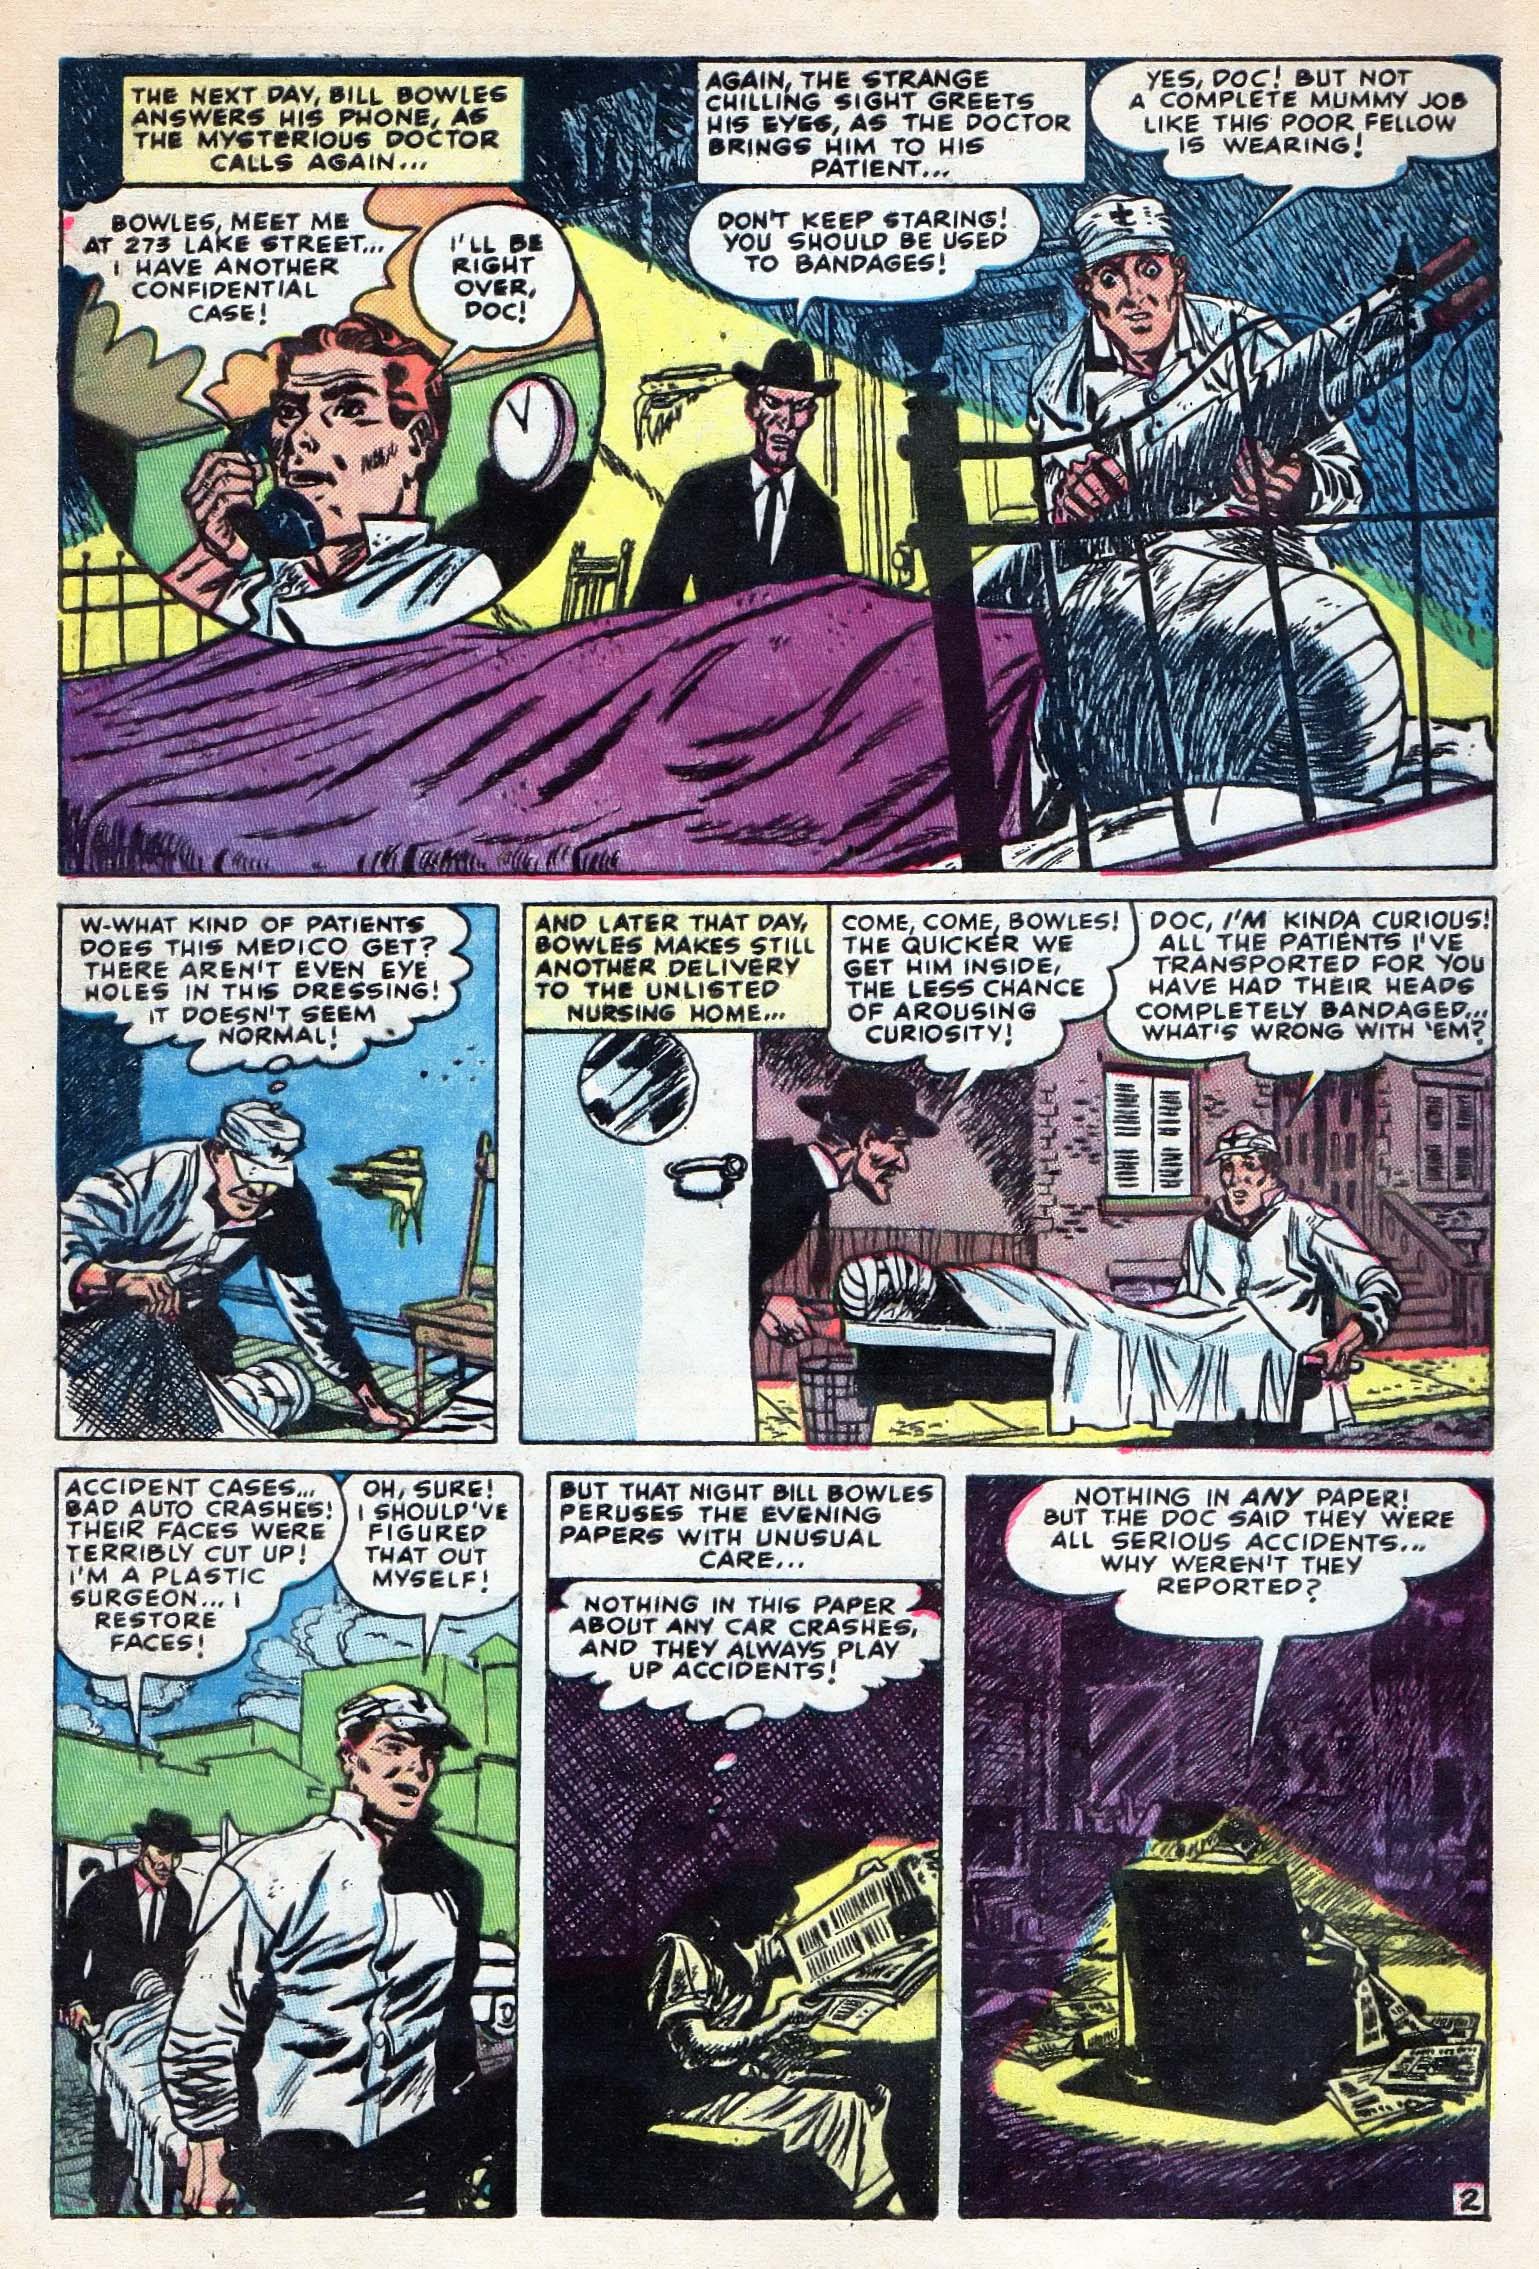 Marvel Tales (1949) 115 Page 3